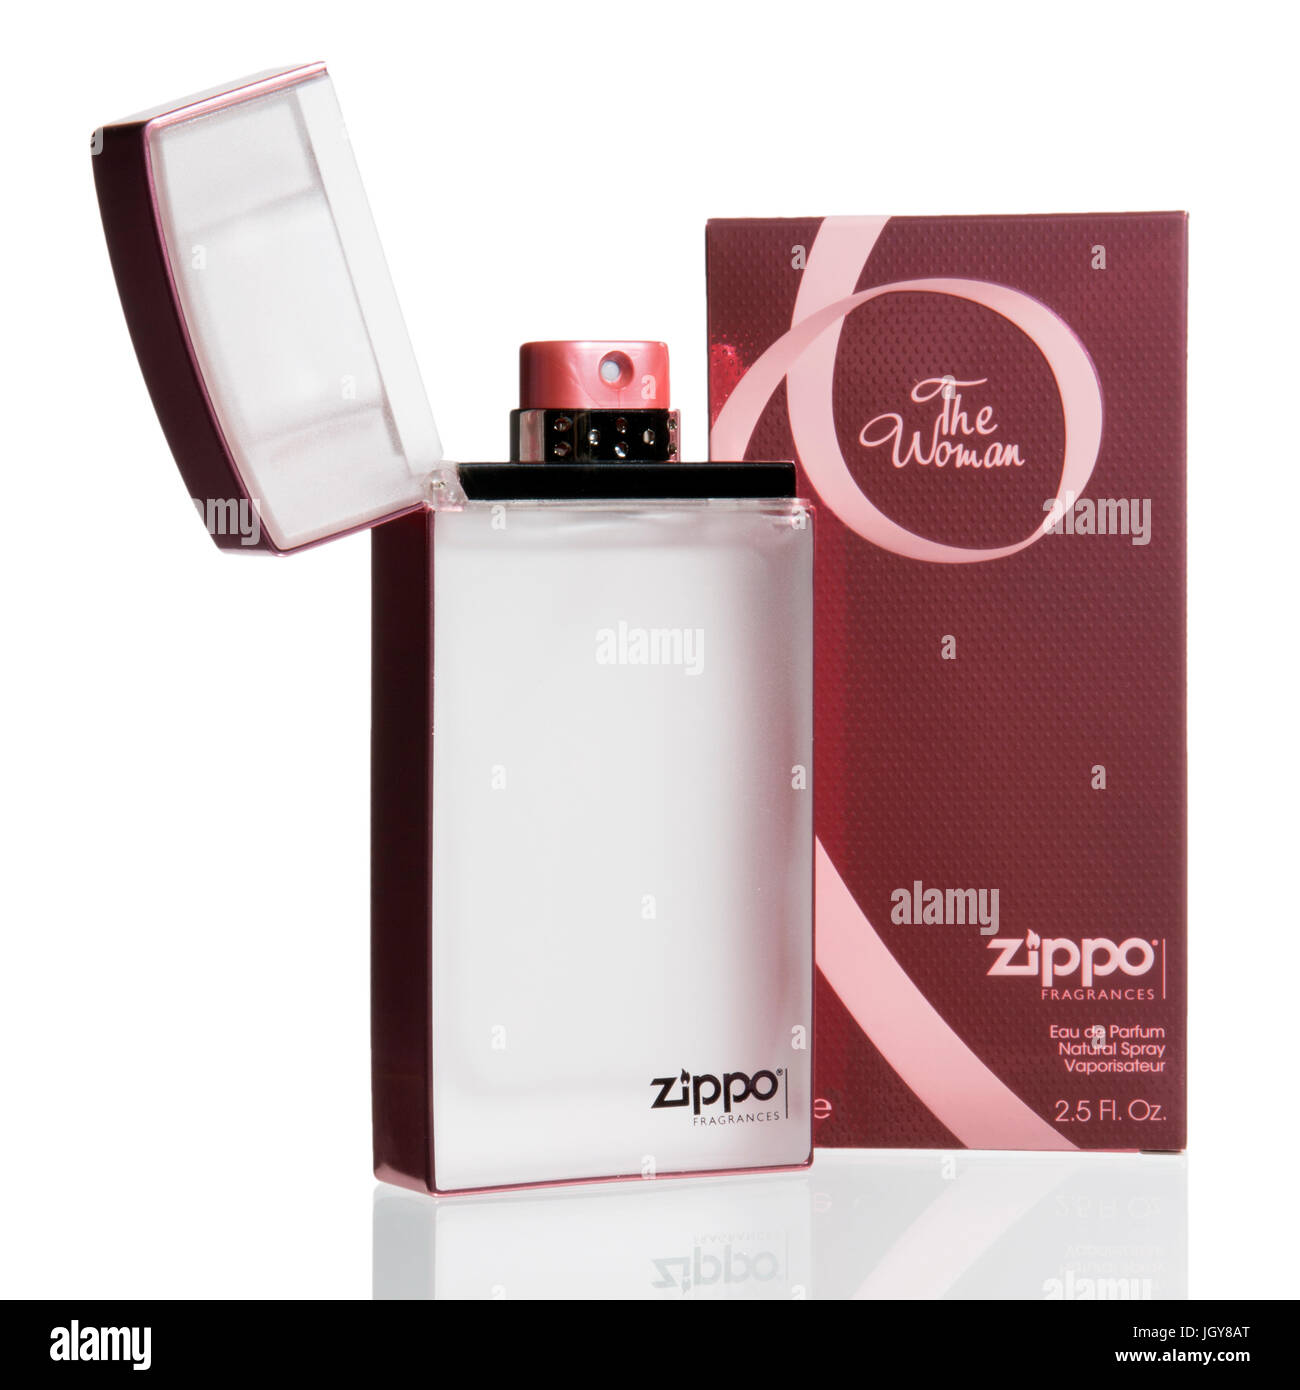 Zippo's "The Woman" women's fragrance in a lighter shaped bottle Stock  Photo - Alamy